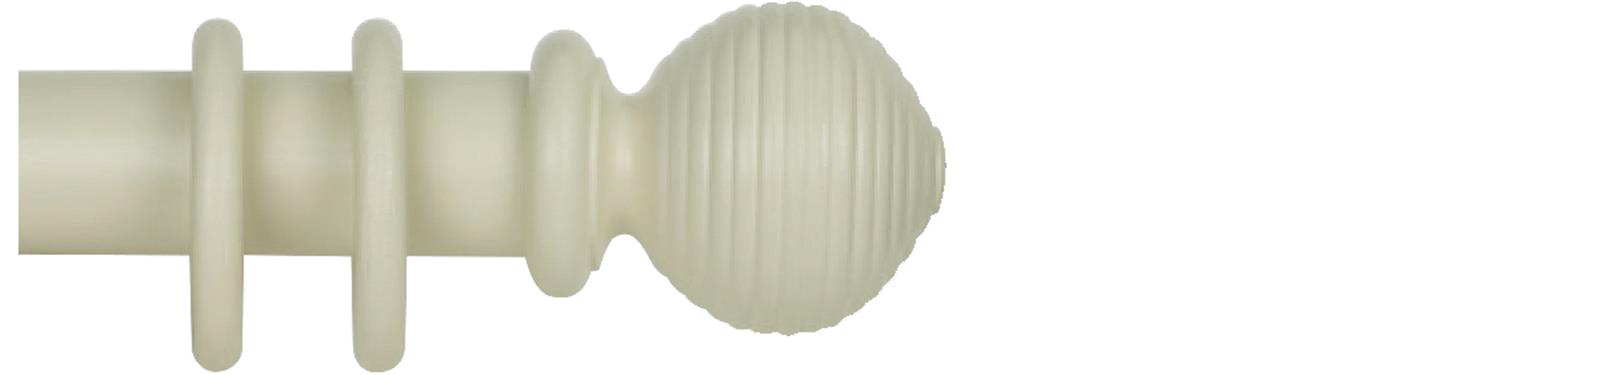 Cameron Fuller 35mm Pole Ivory Beehive